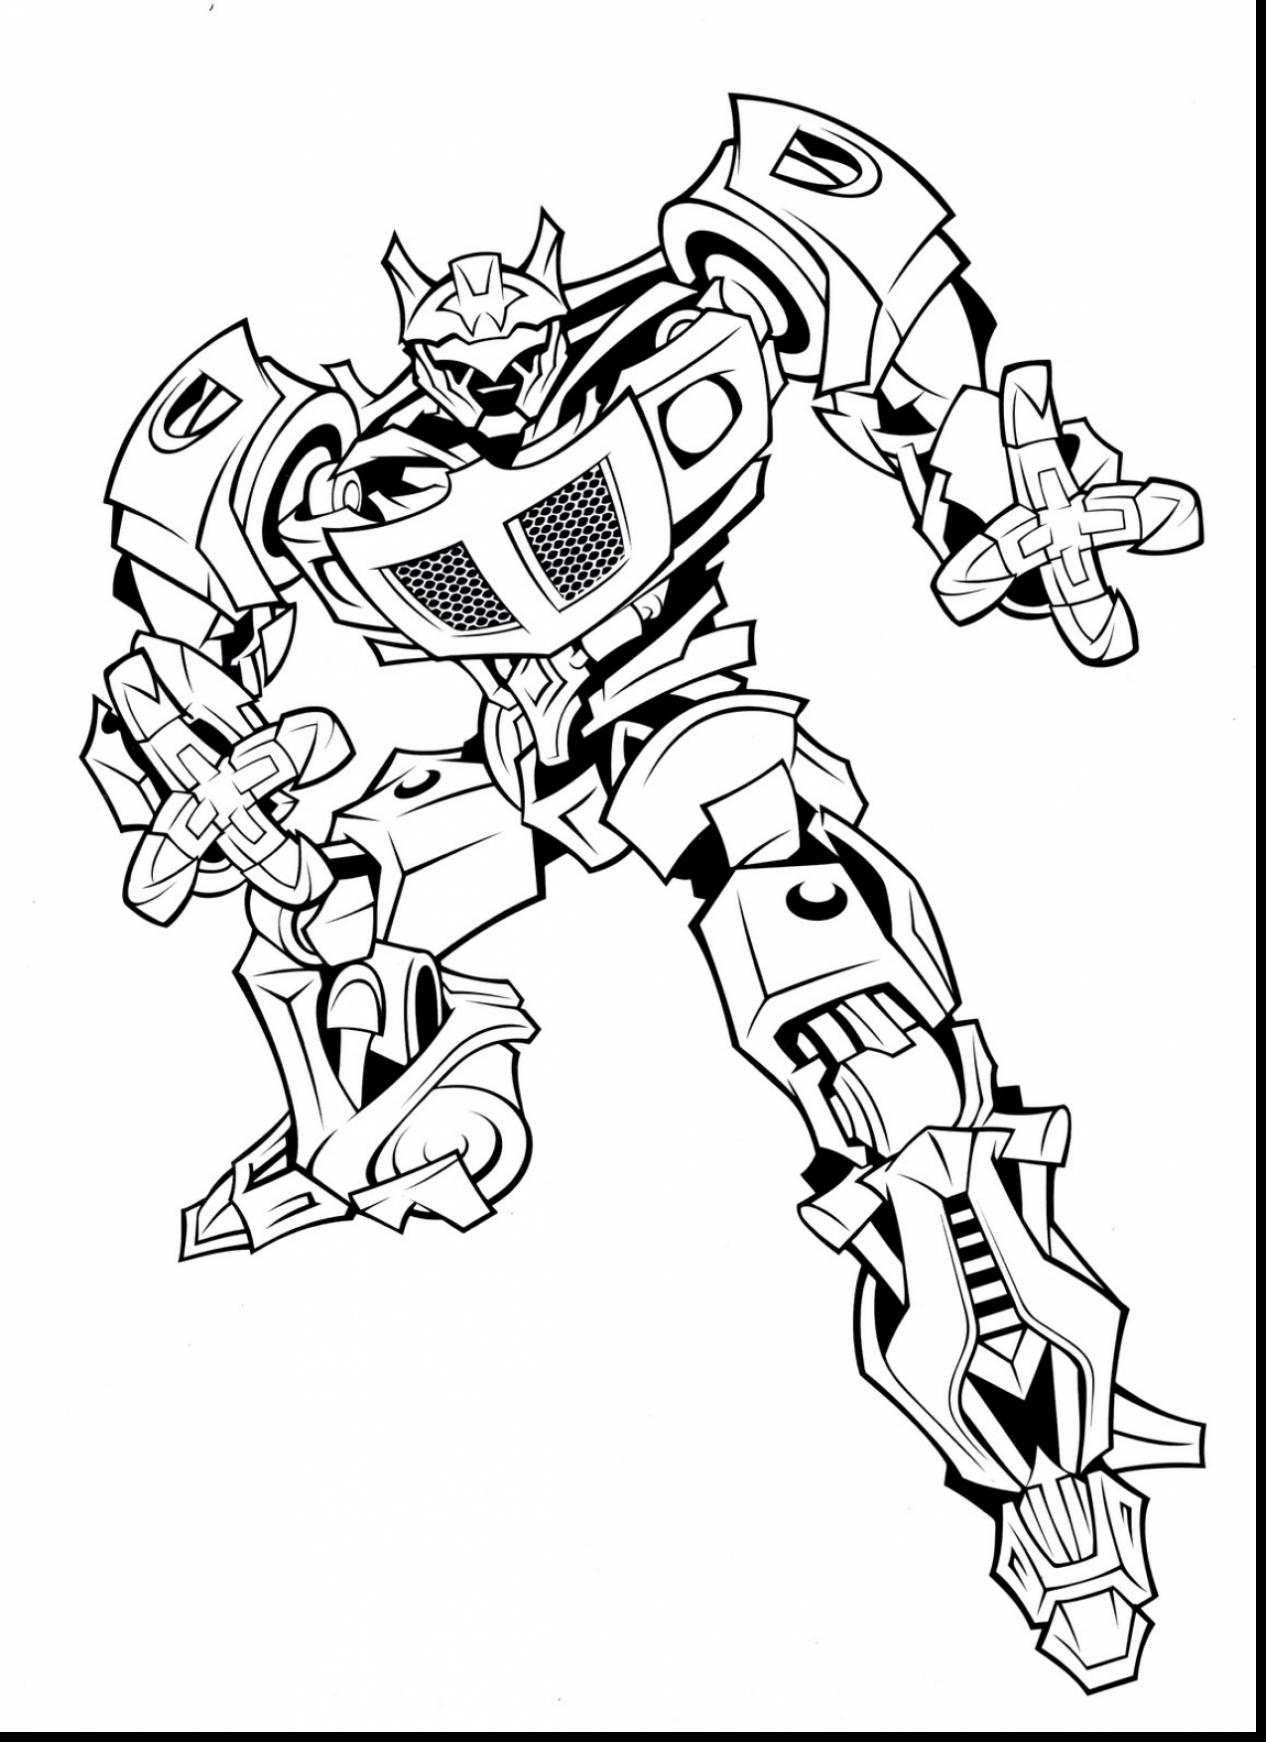 Printable Transformers Coloring Pages Coloring Ideas Transformers Coloring Pages Free Printable At